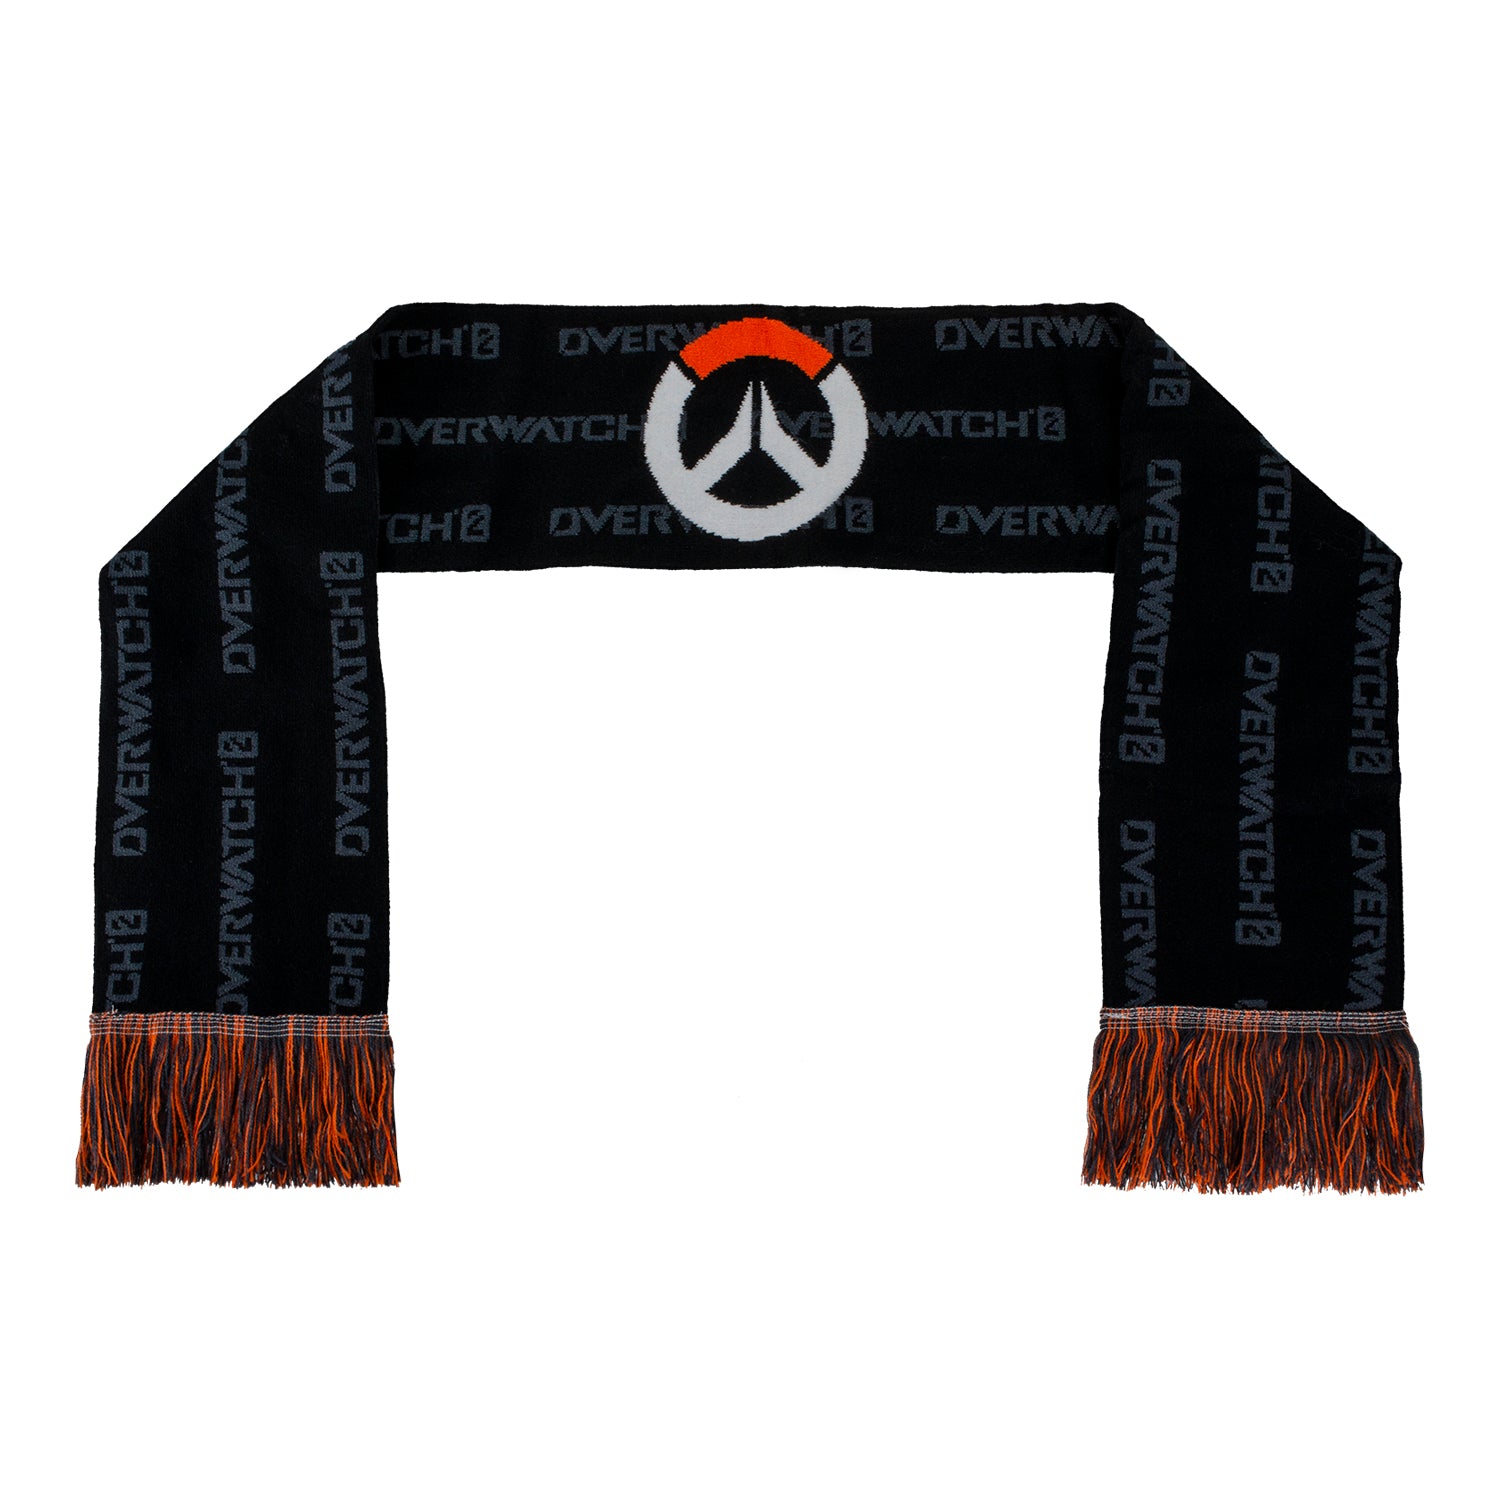 Overwatch 2 Black Scarf - Full View